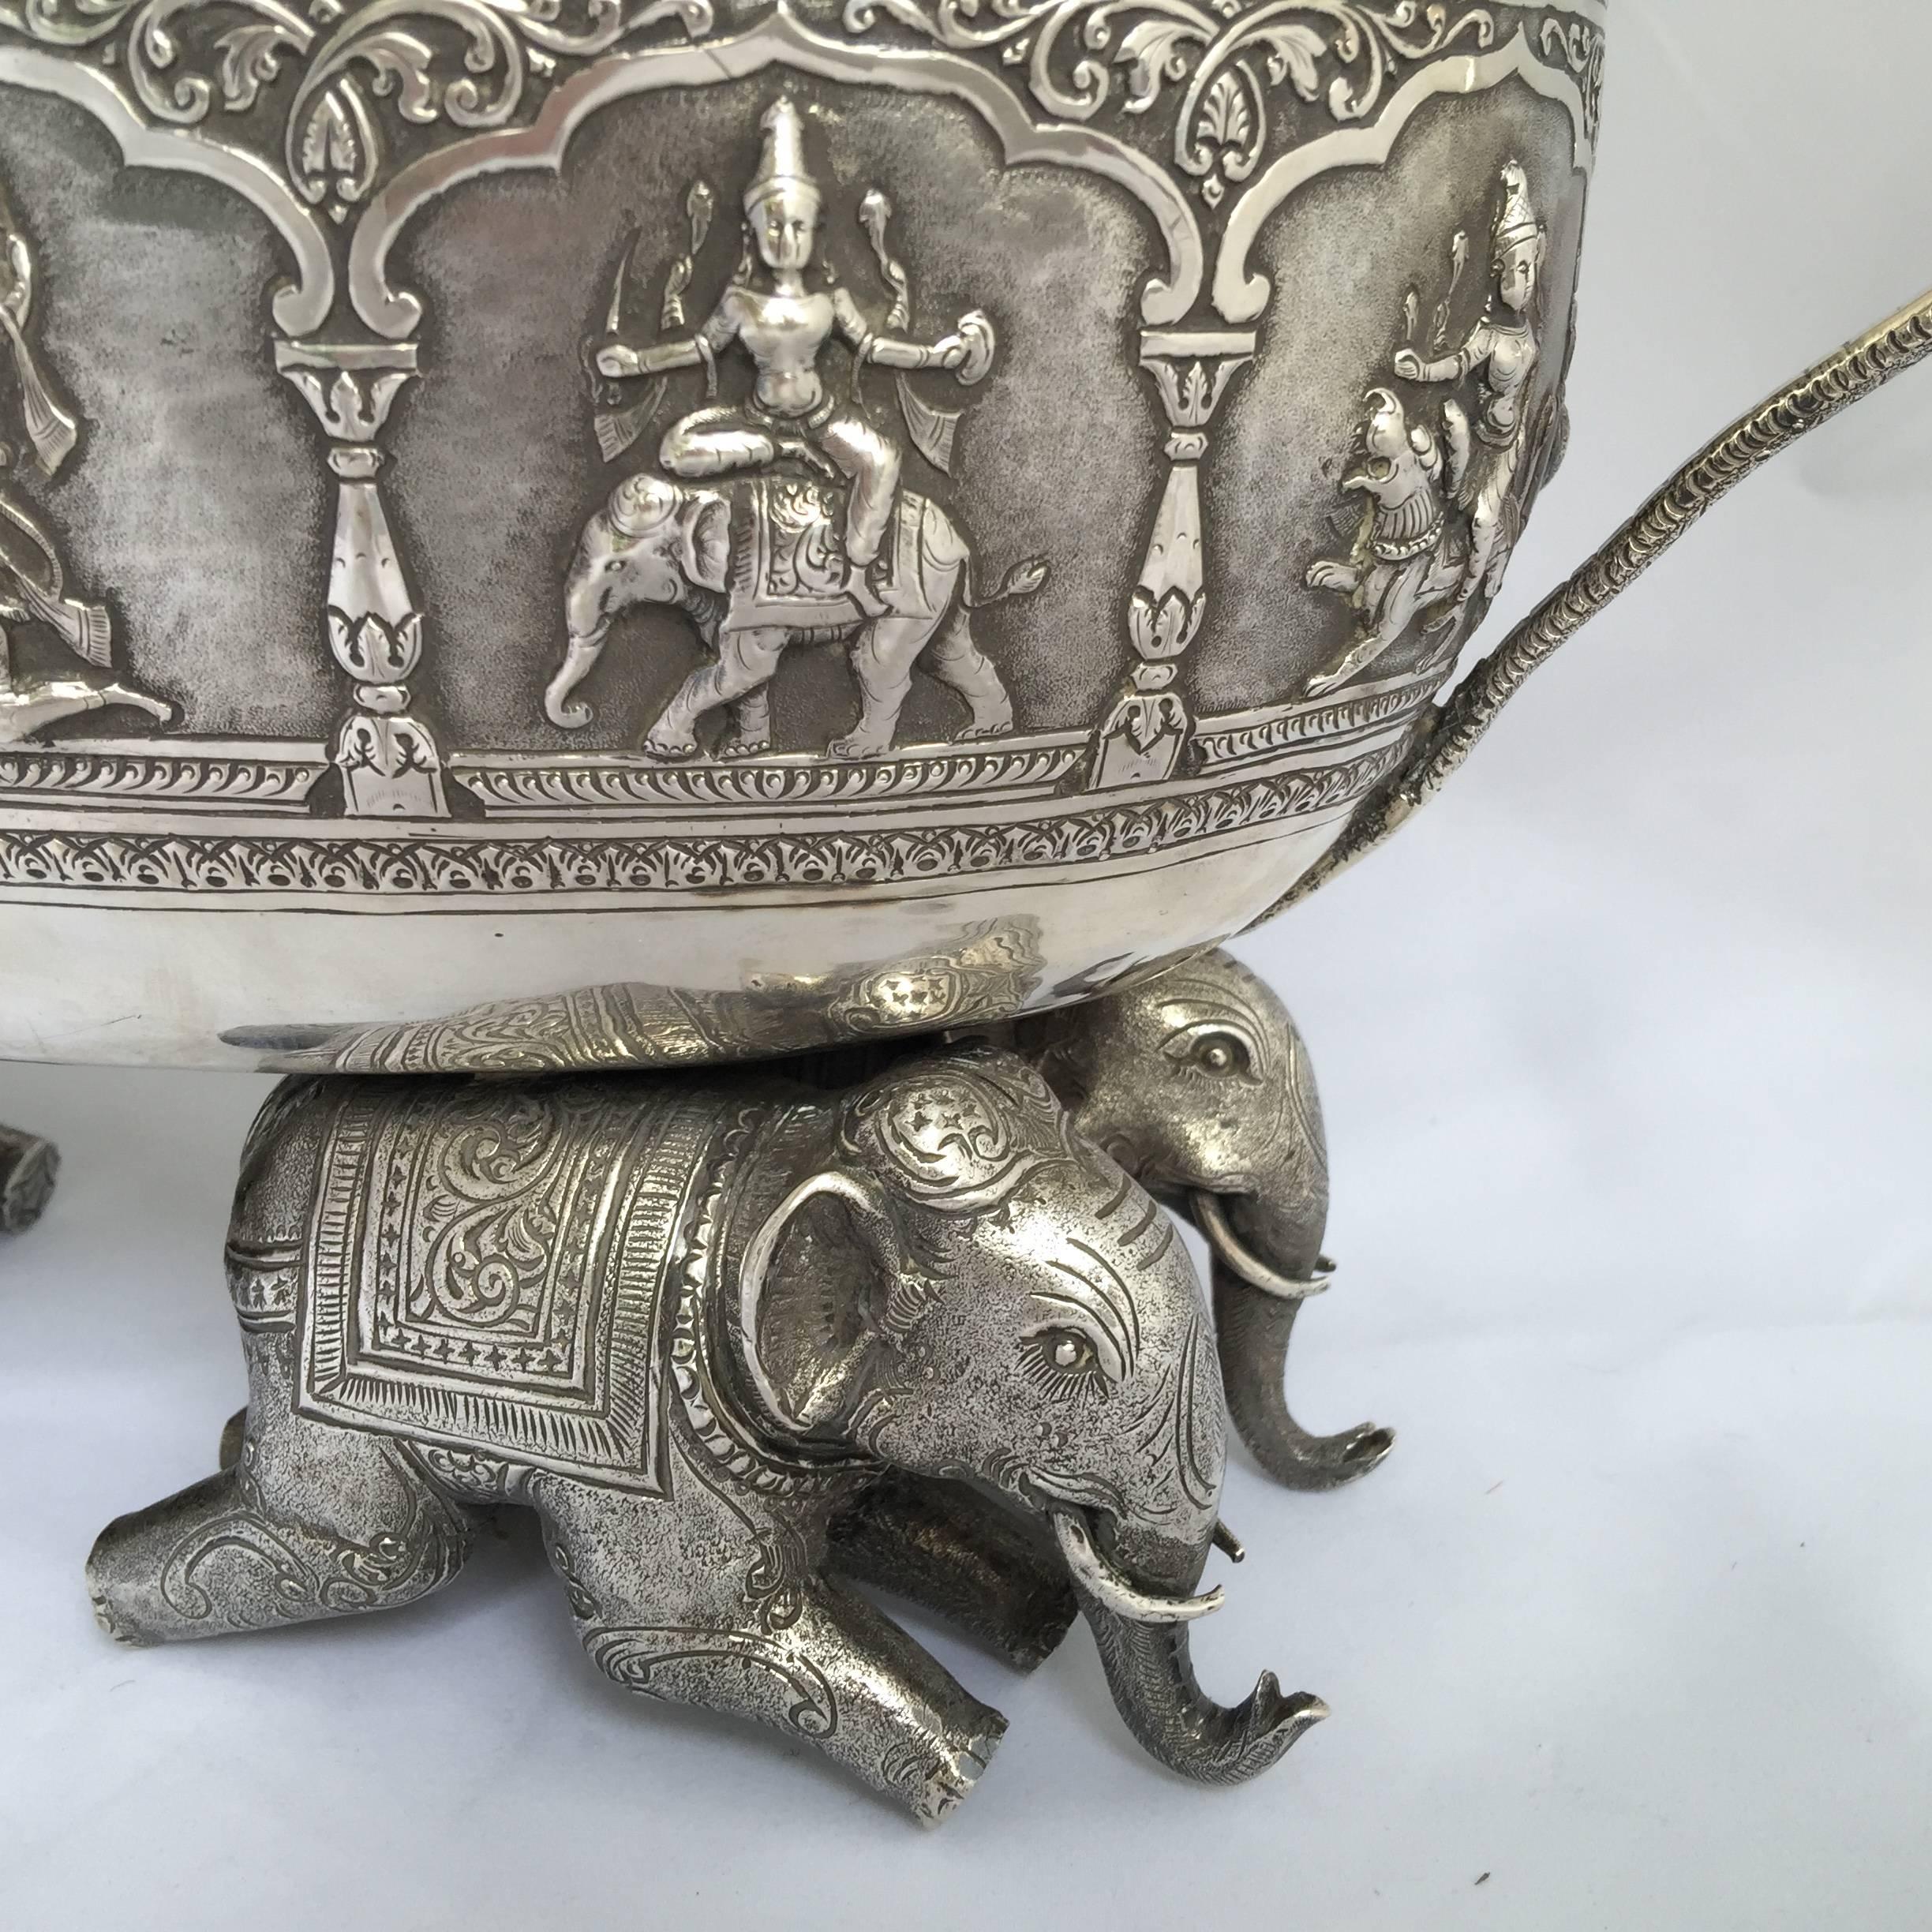 Anglo-Indian 19th Century Indian Sterling Silver Jardiniere, Cast Elephants Form the Base